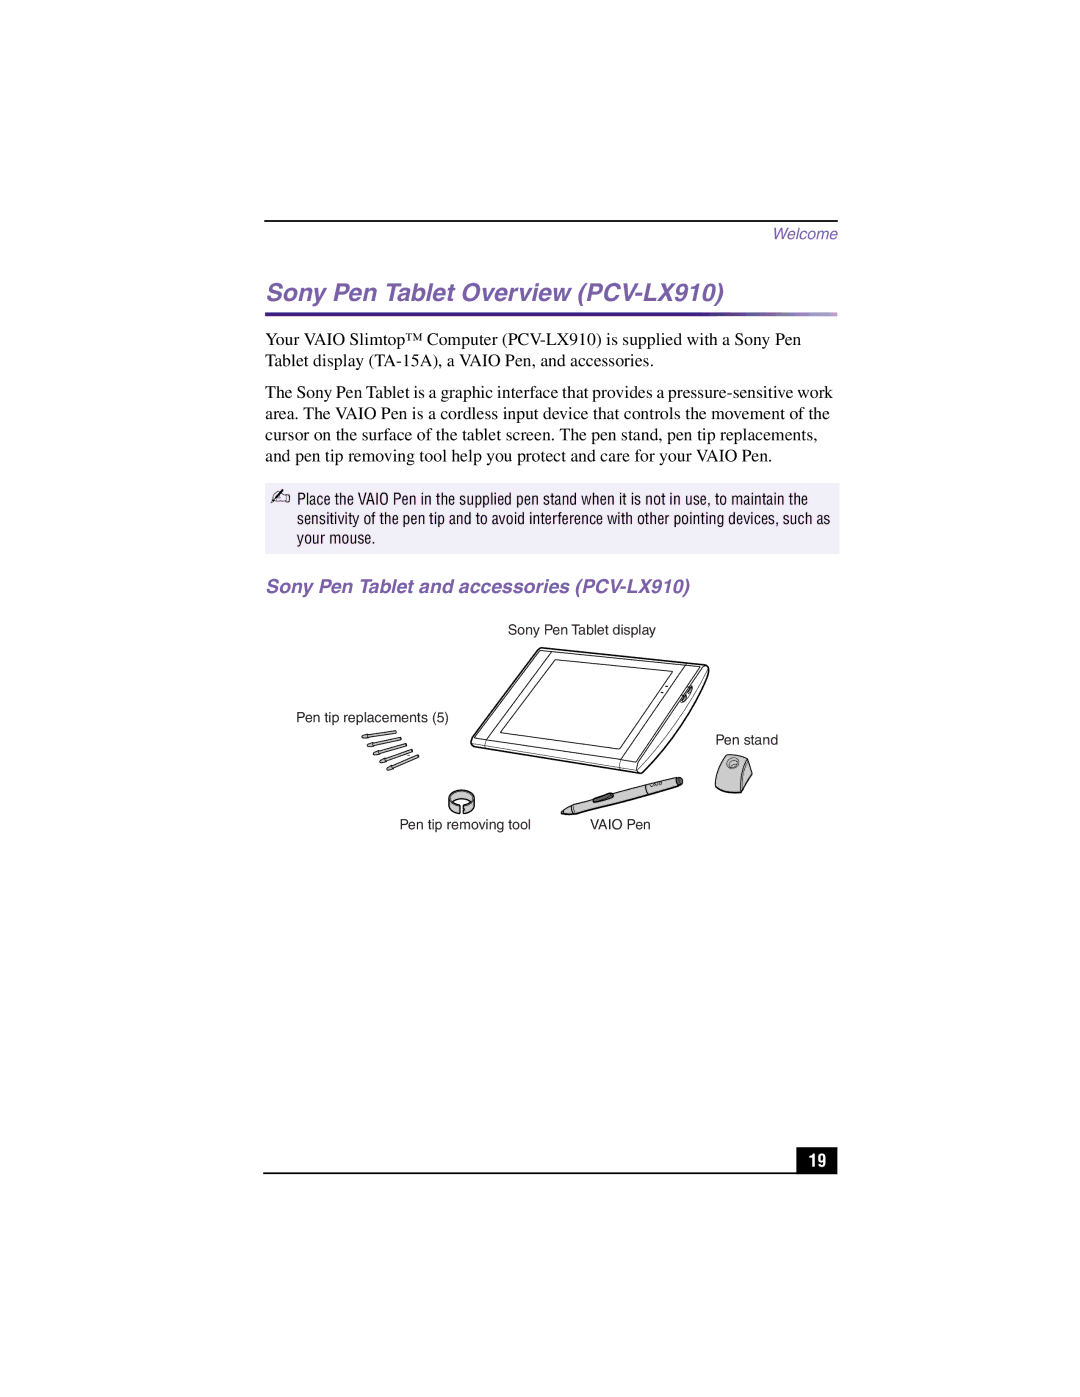 Sony PCV-LX810 manual Sony Pen Tablet Overview PCV-LX910, Sony Pen Tablet and accessories PCV-LX910 